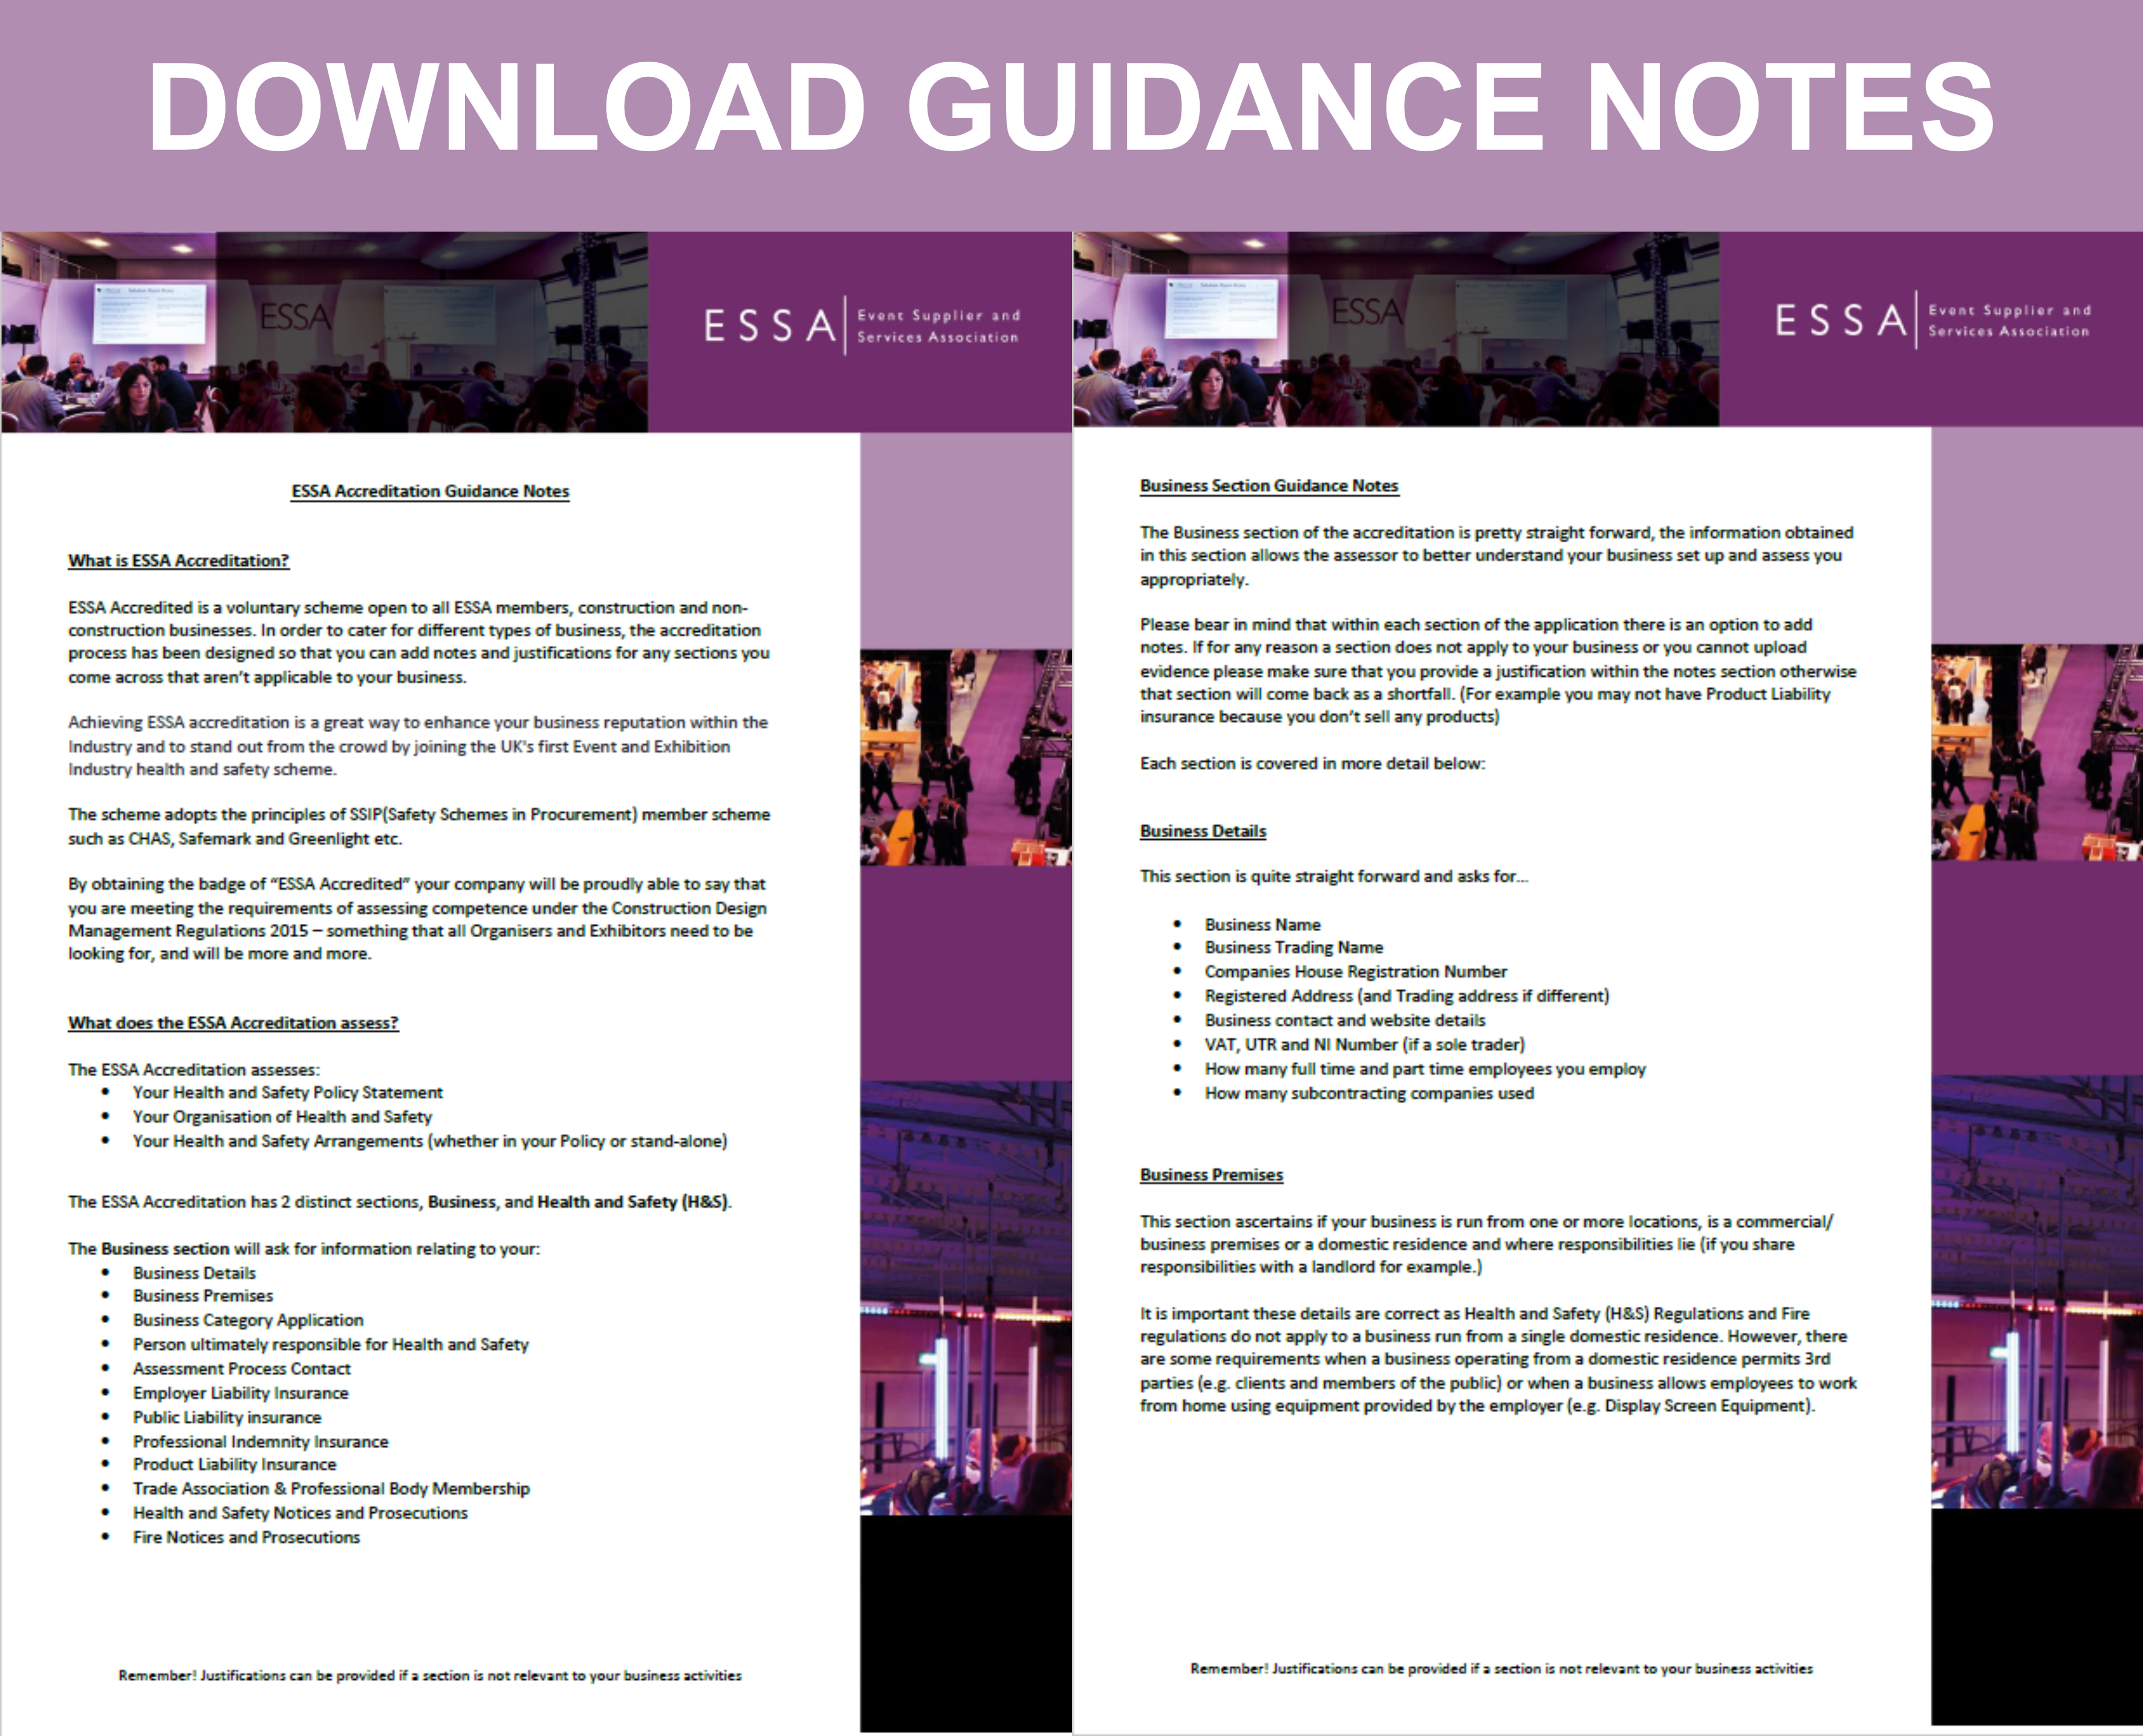 Guidance Notes Image